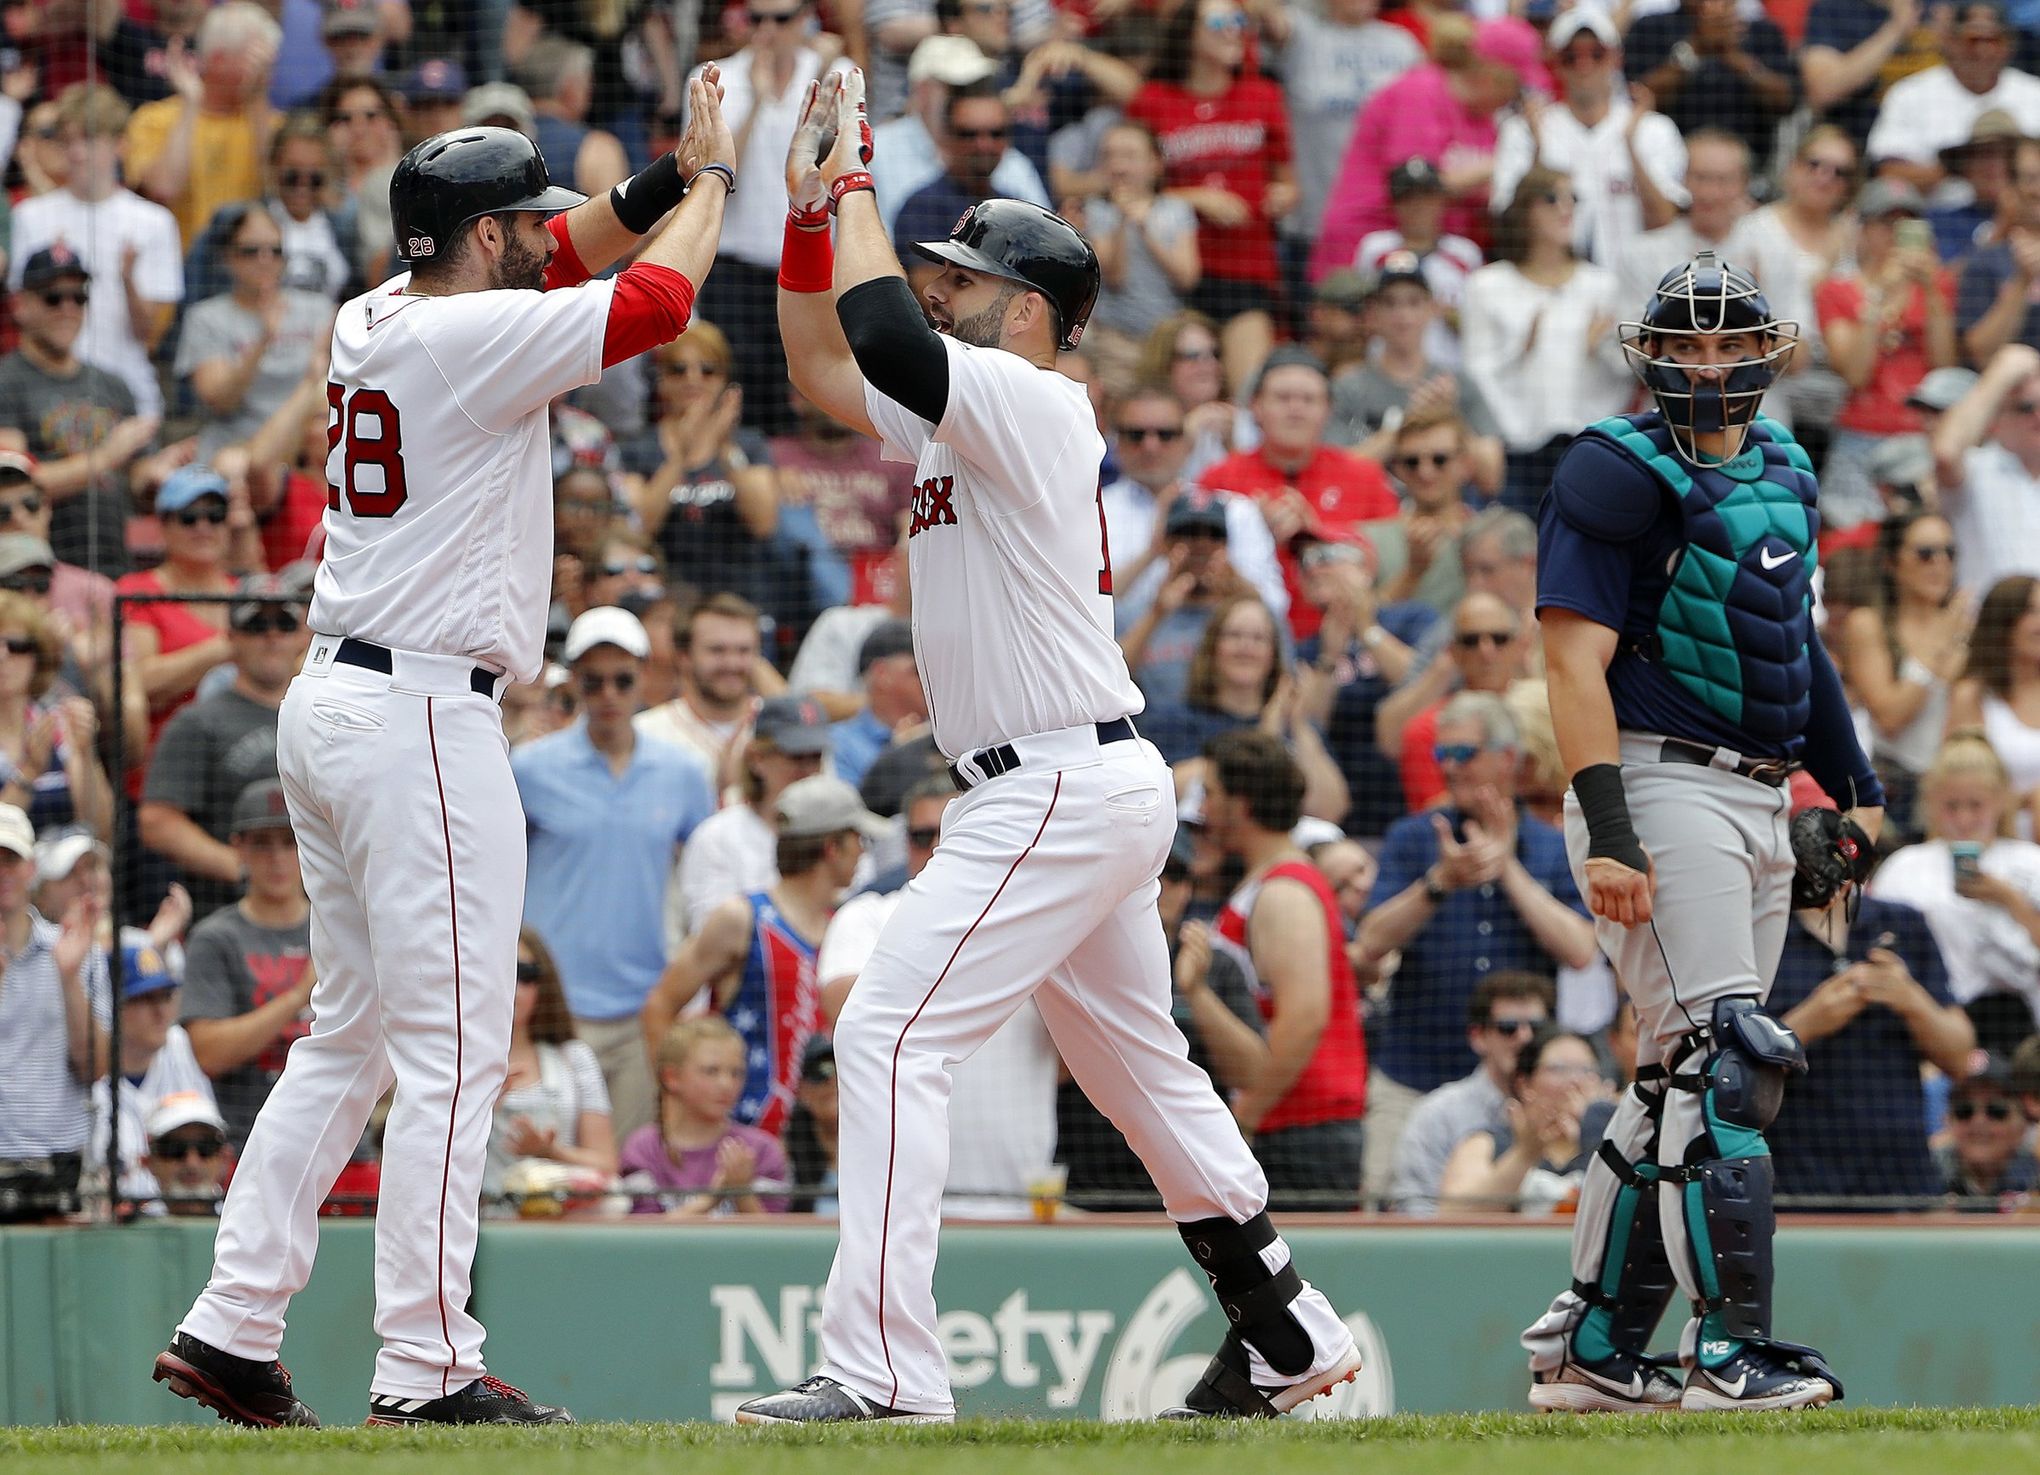 Chris Sale practically perfect in first game back from injury, Sox defeat  Tigers